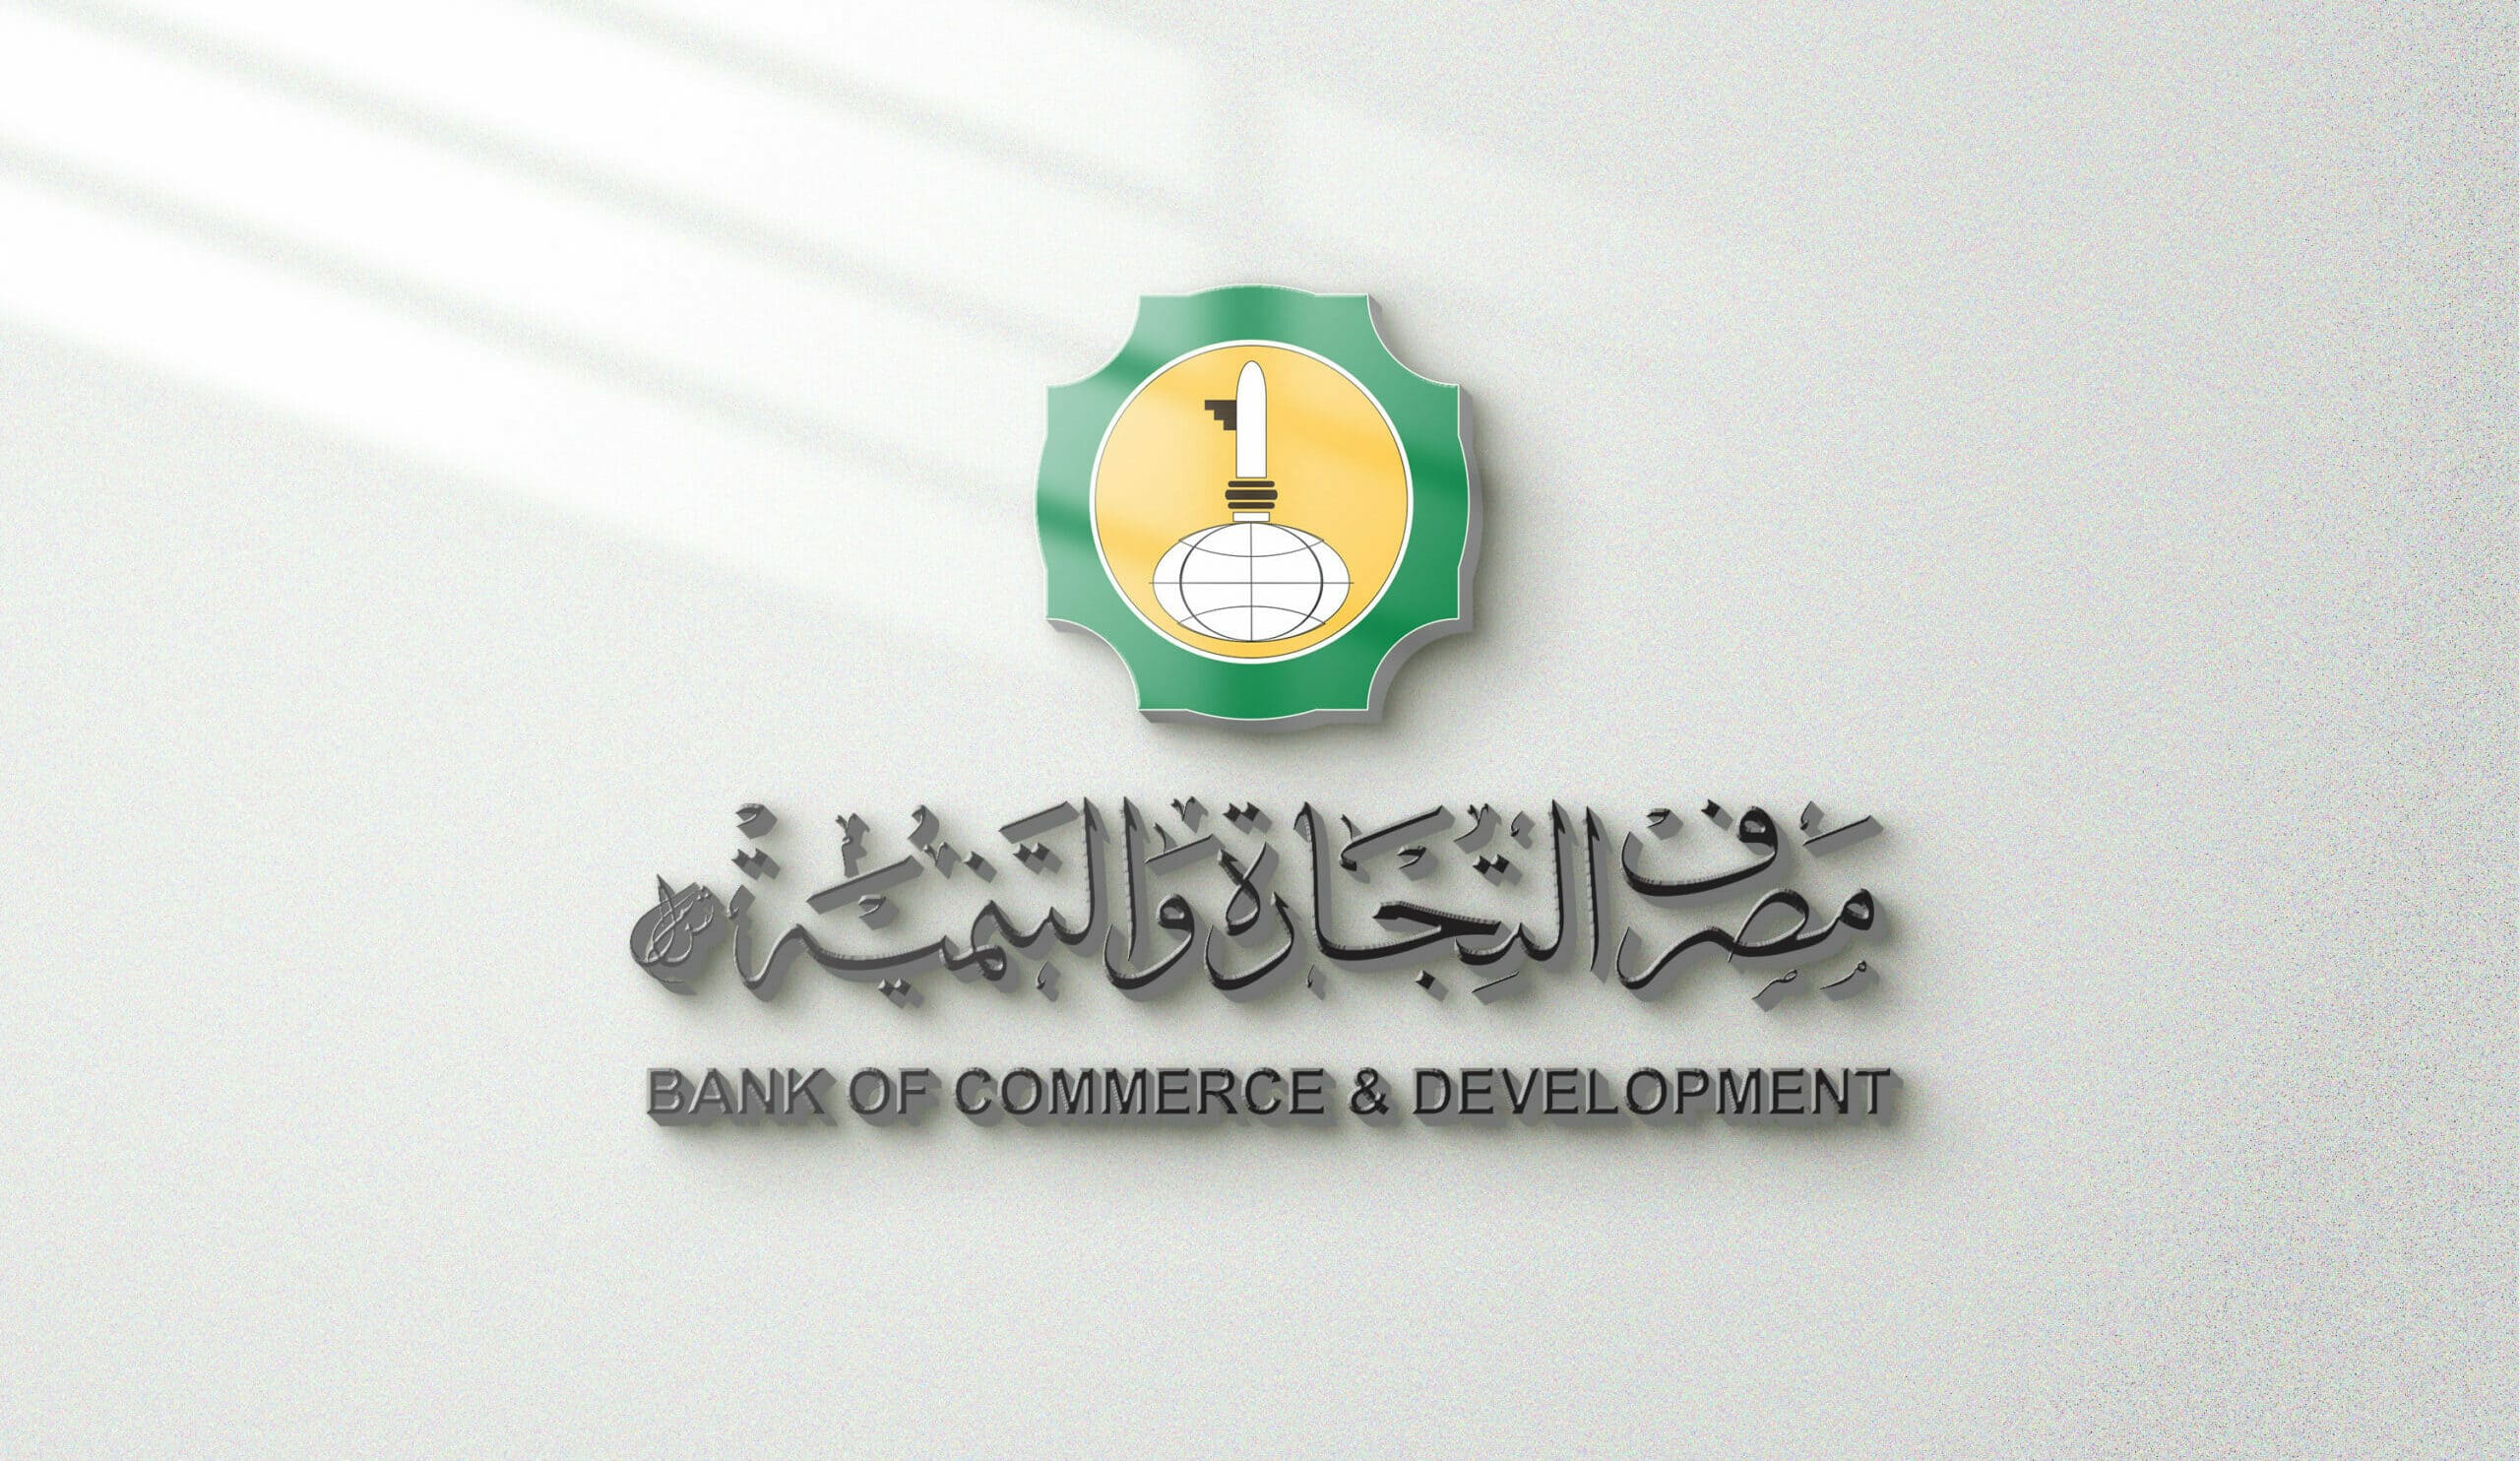 Connecting All Bank of Commerce and Development Branches Under One Network